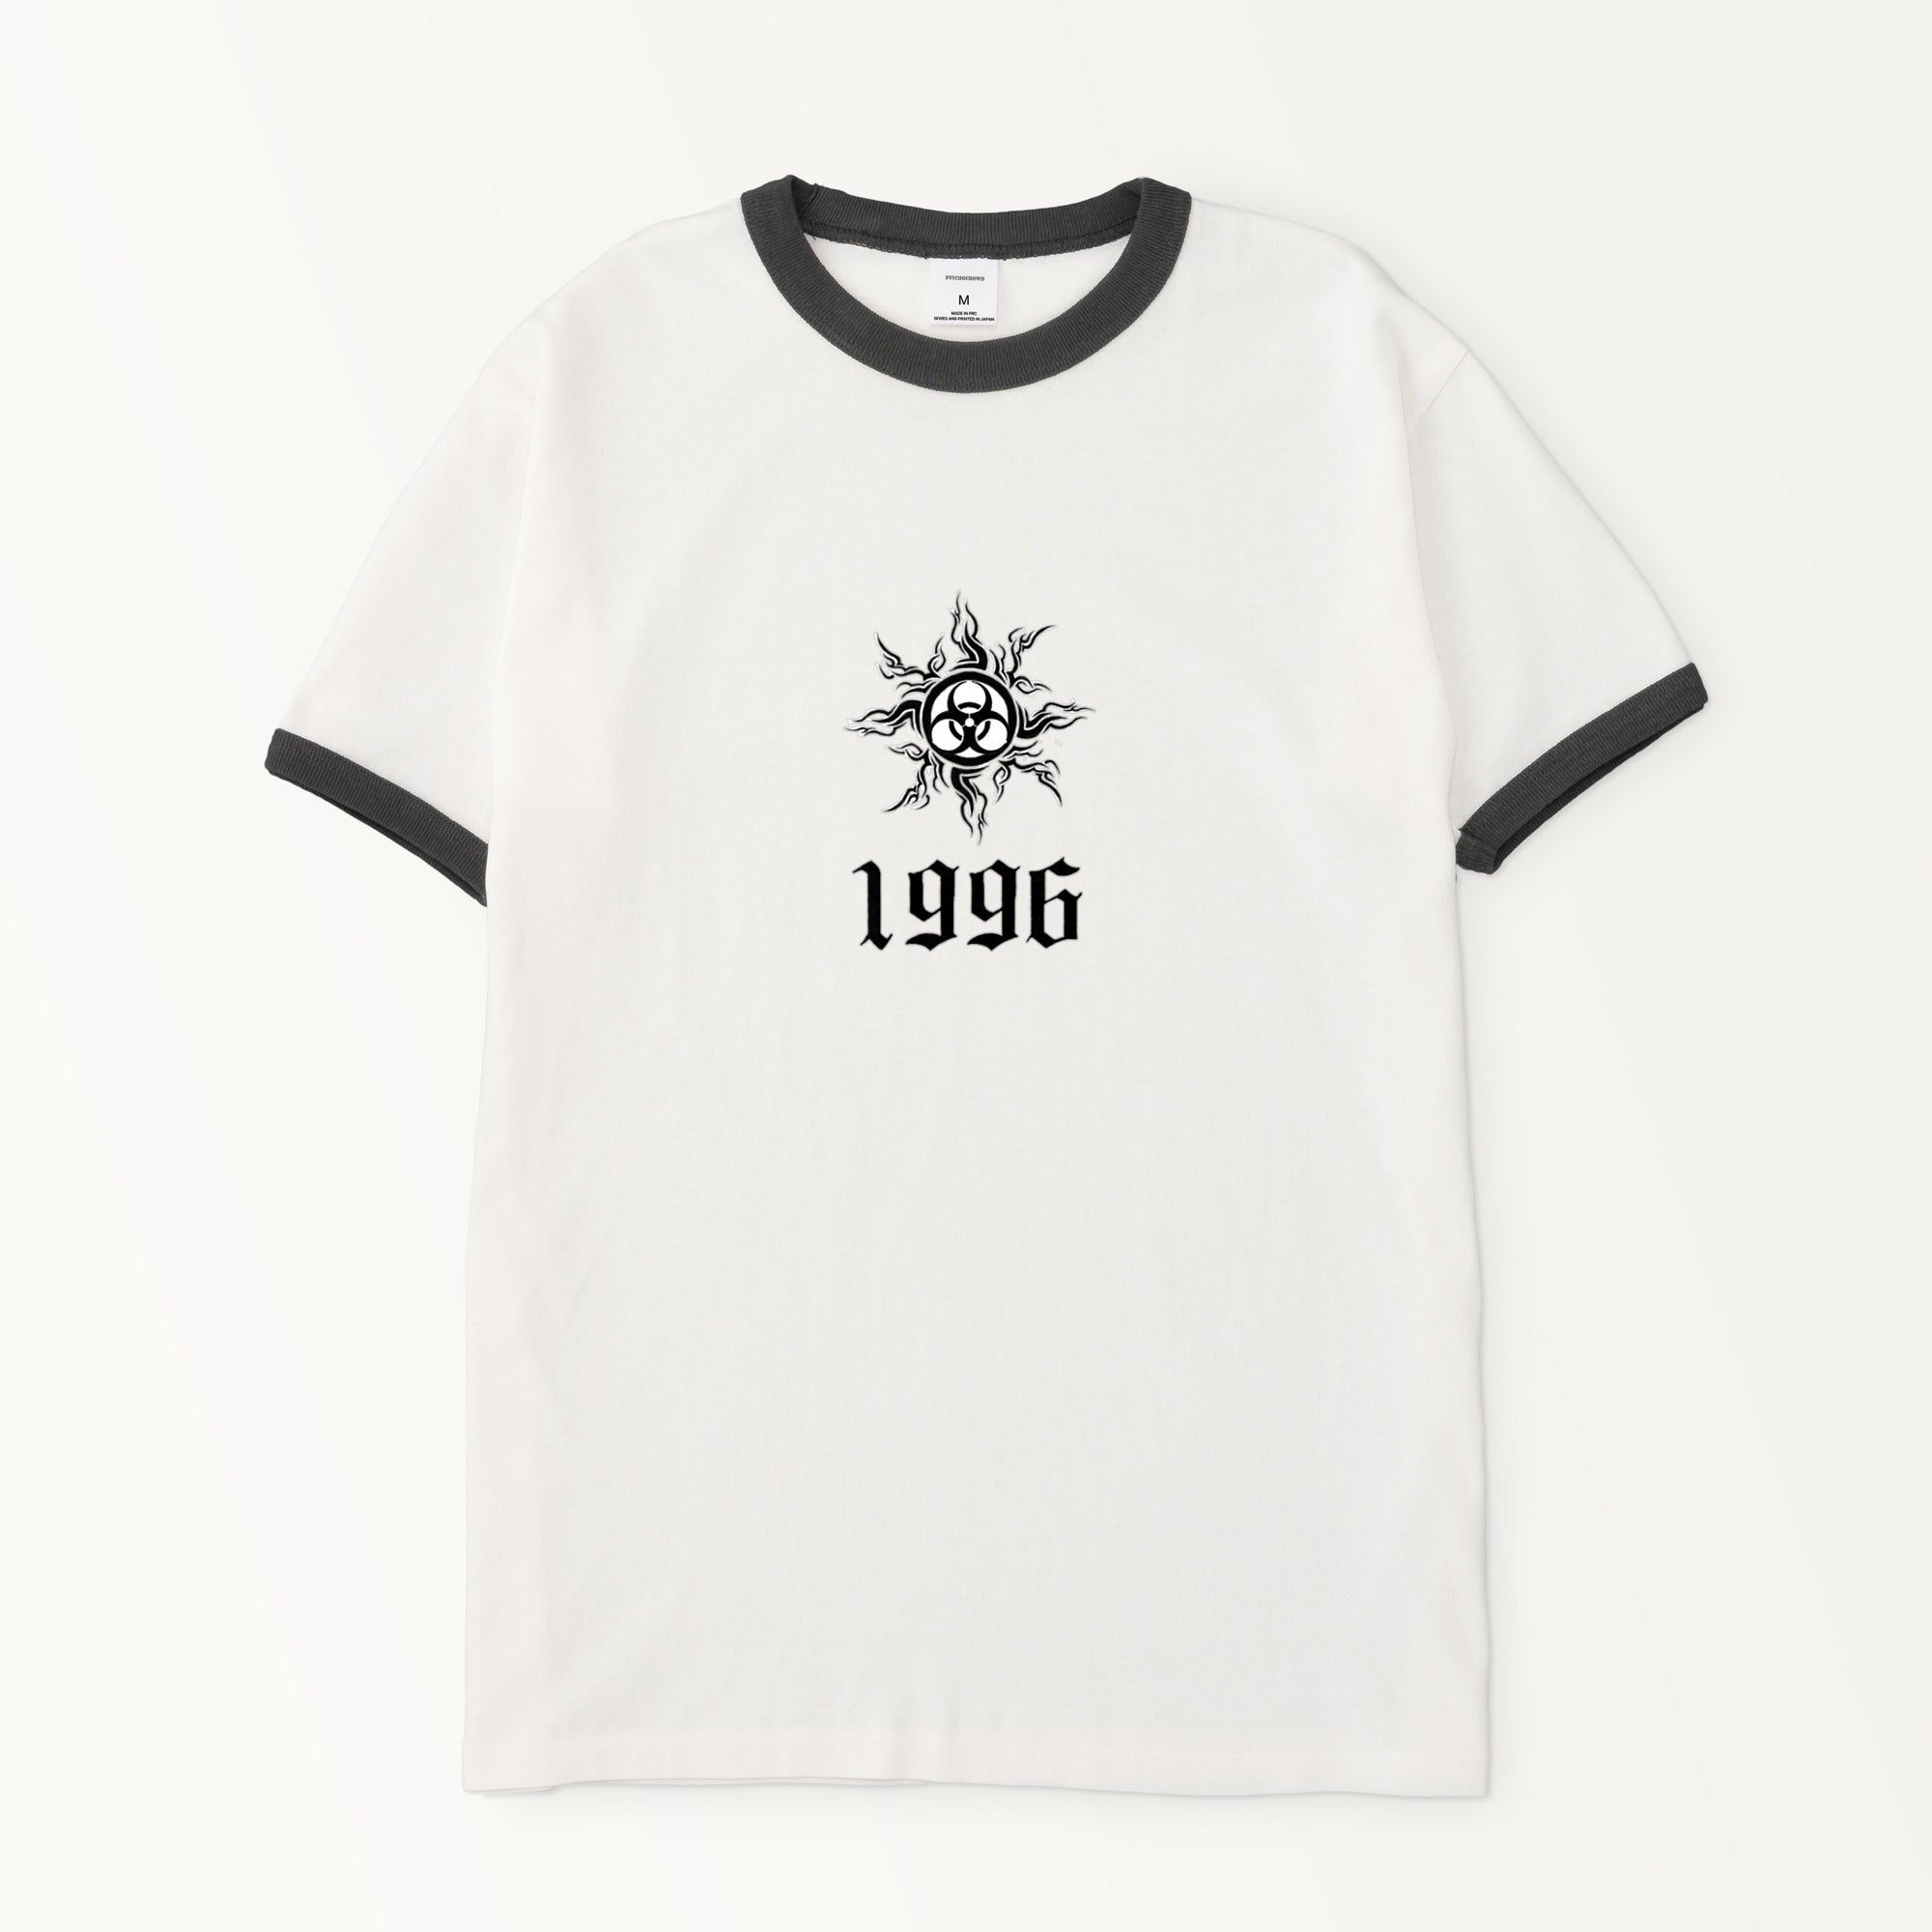 History/OpenEnd Linger Tee